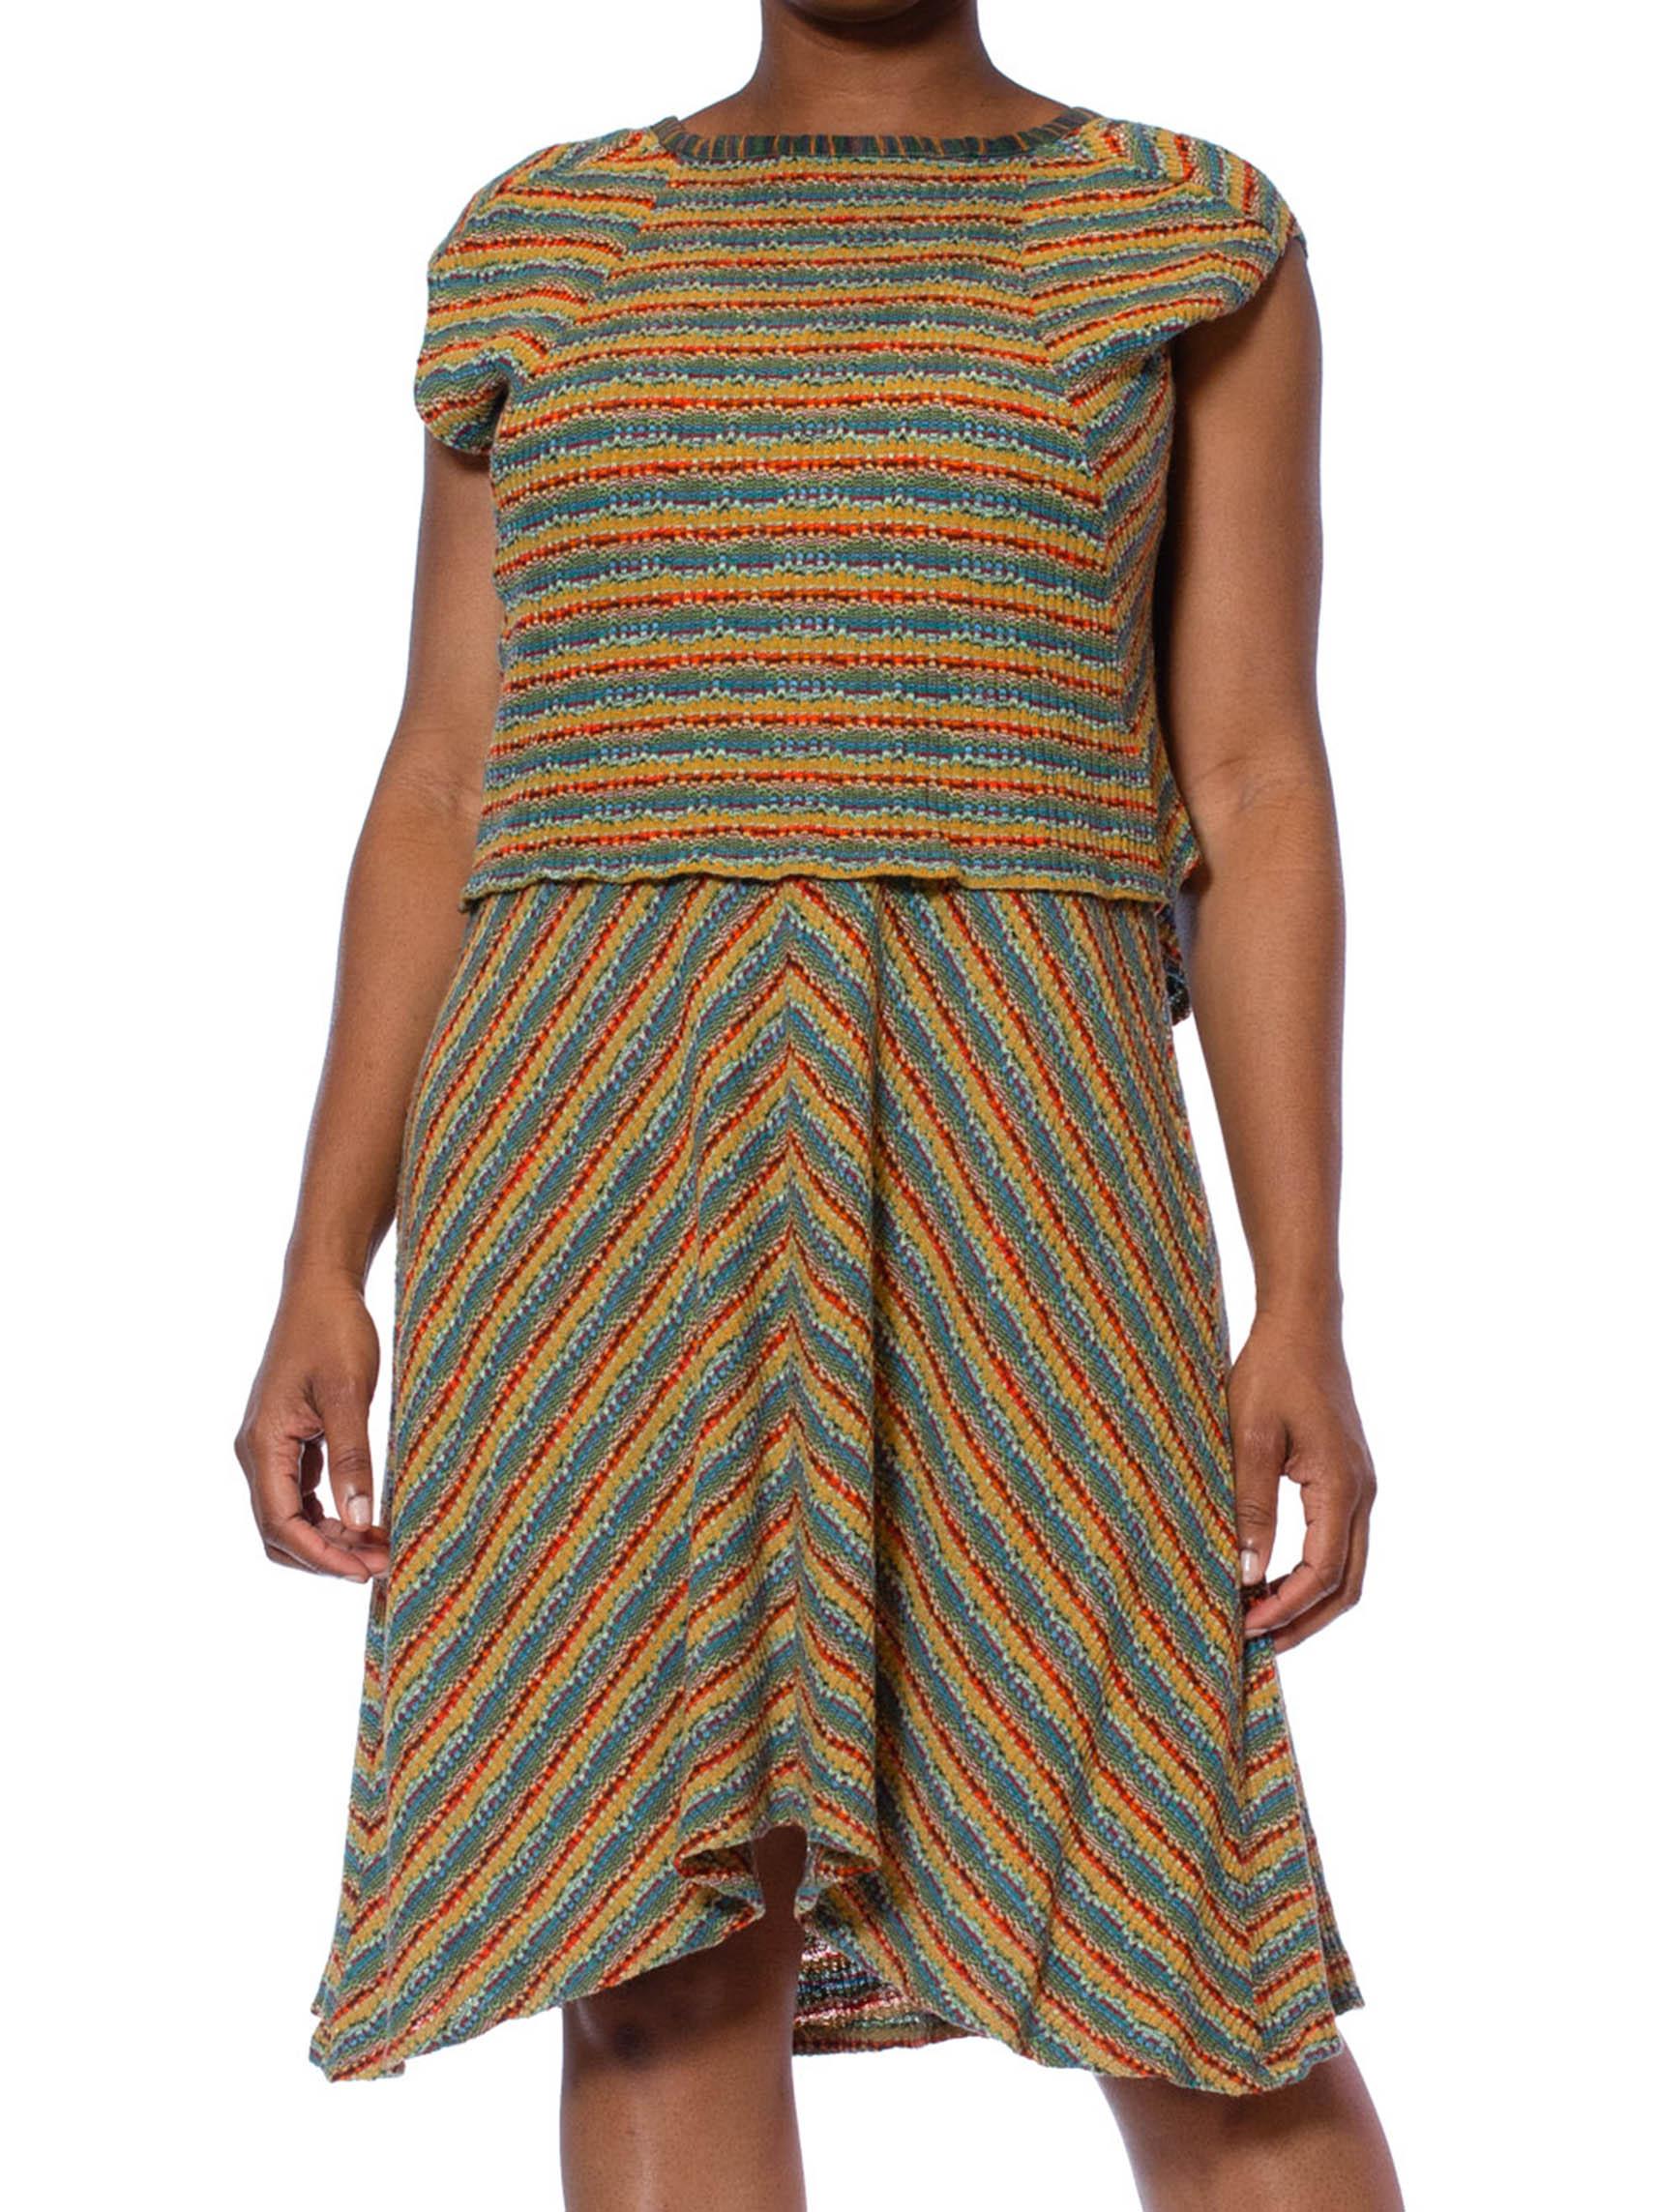 Women's 1980S MISSONI Earth Tone Wool Blend Knit Dress With Matching Vest